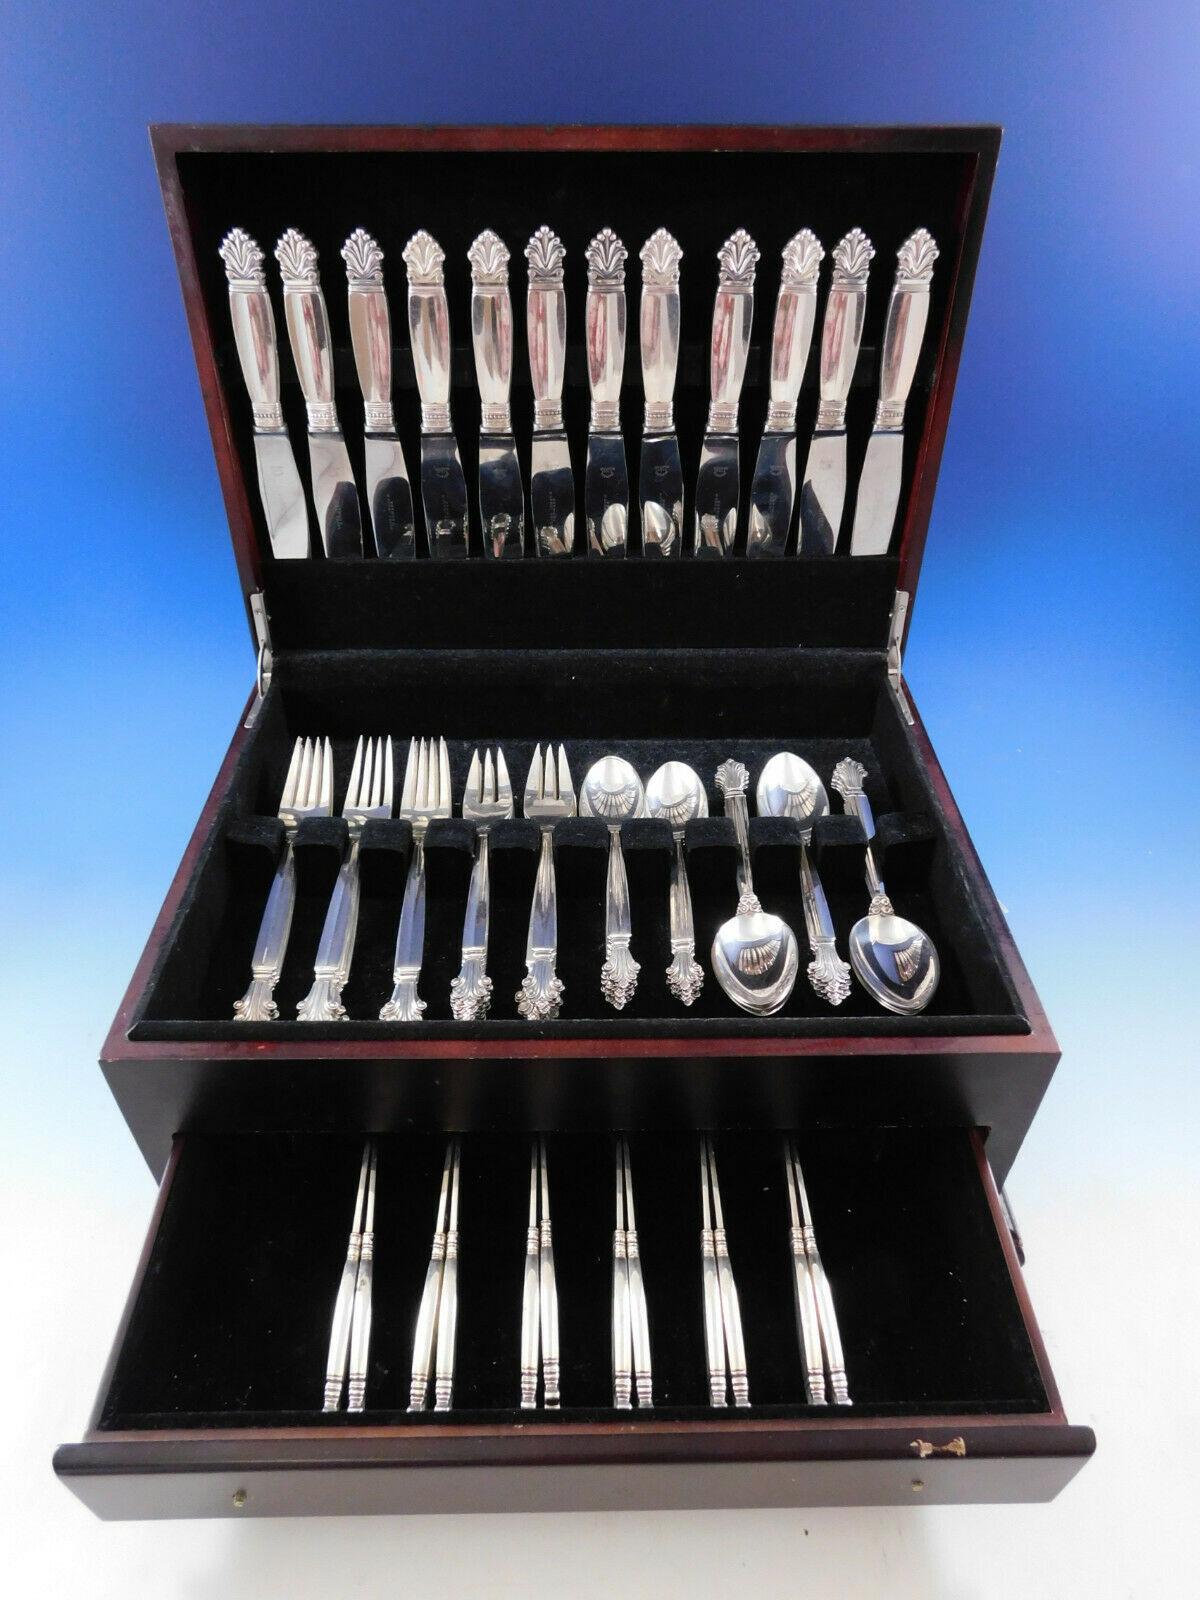 Dinner size Acanthus by Georg Jensen sterling silver flatware set, 72 pieces. This set includes:

12 dinner knives, short handle, 9